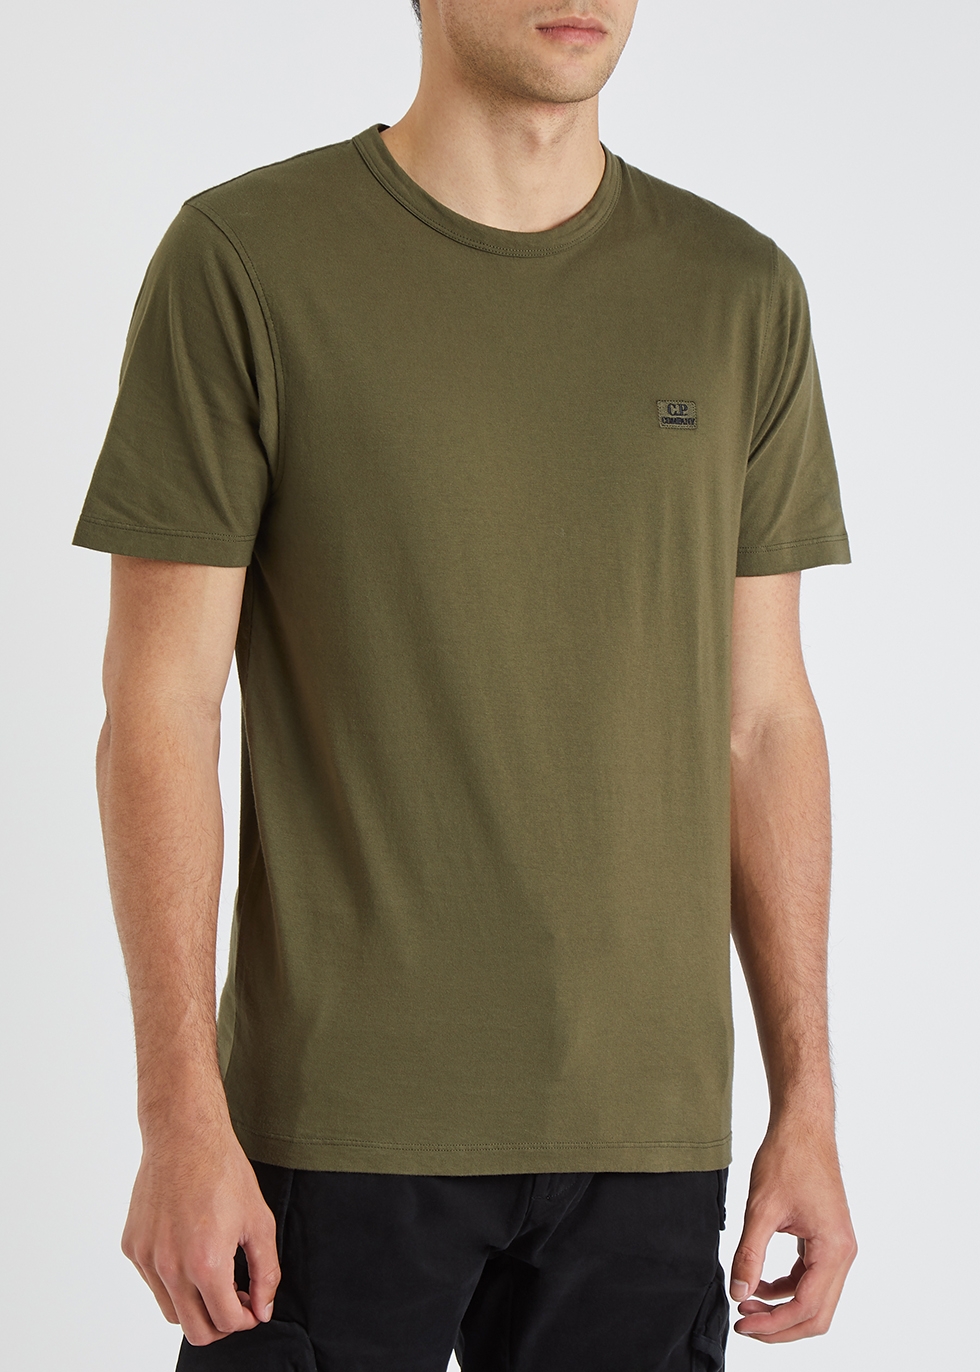 C.P Company T-shirts Company Cotton T-shirt in Military Green Green for Men Mens T-shirts C.P 